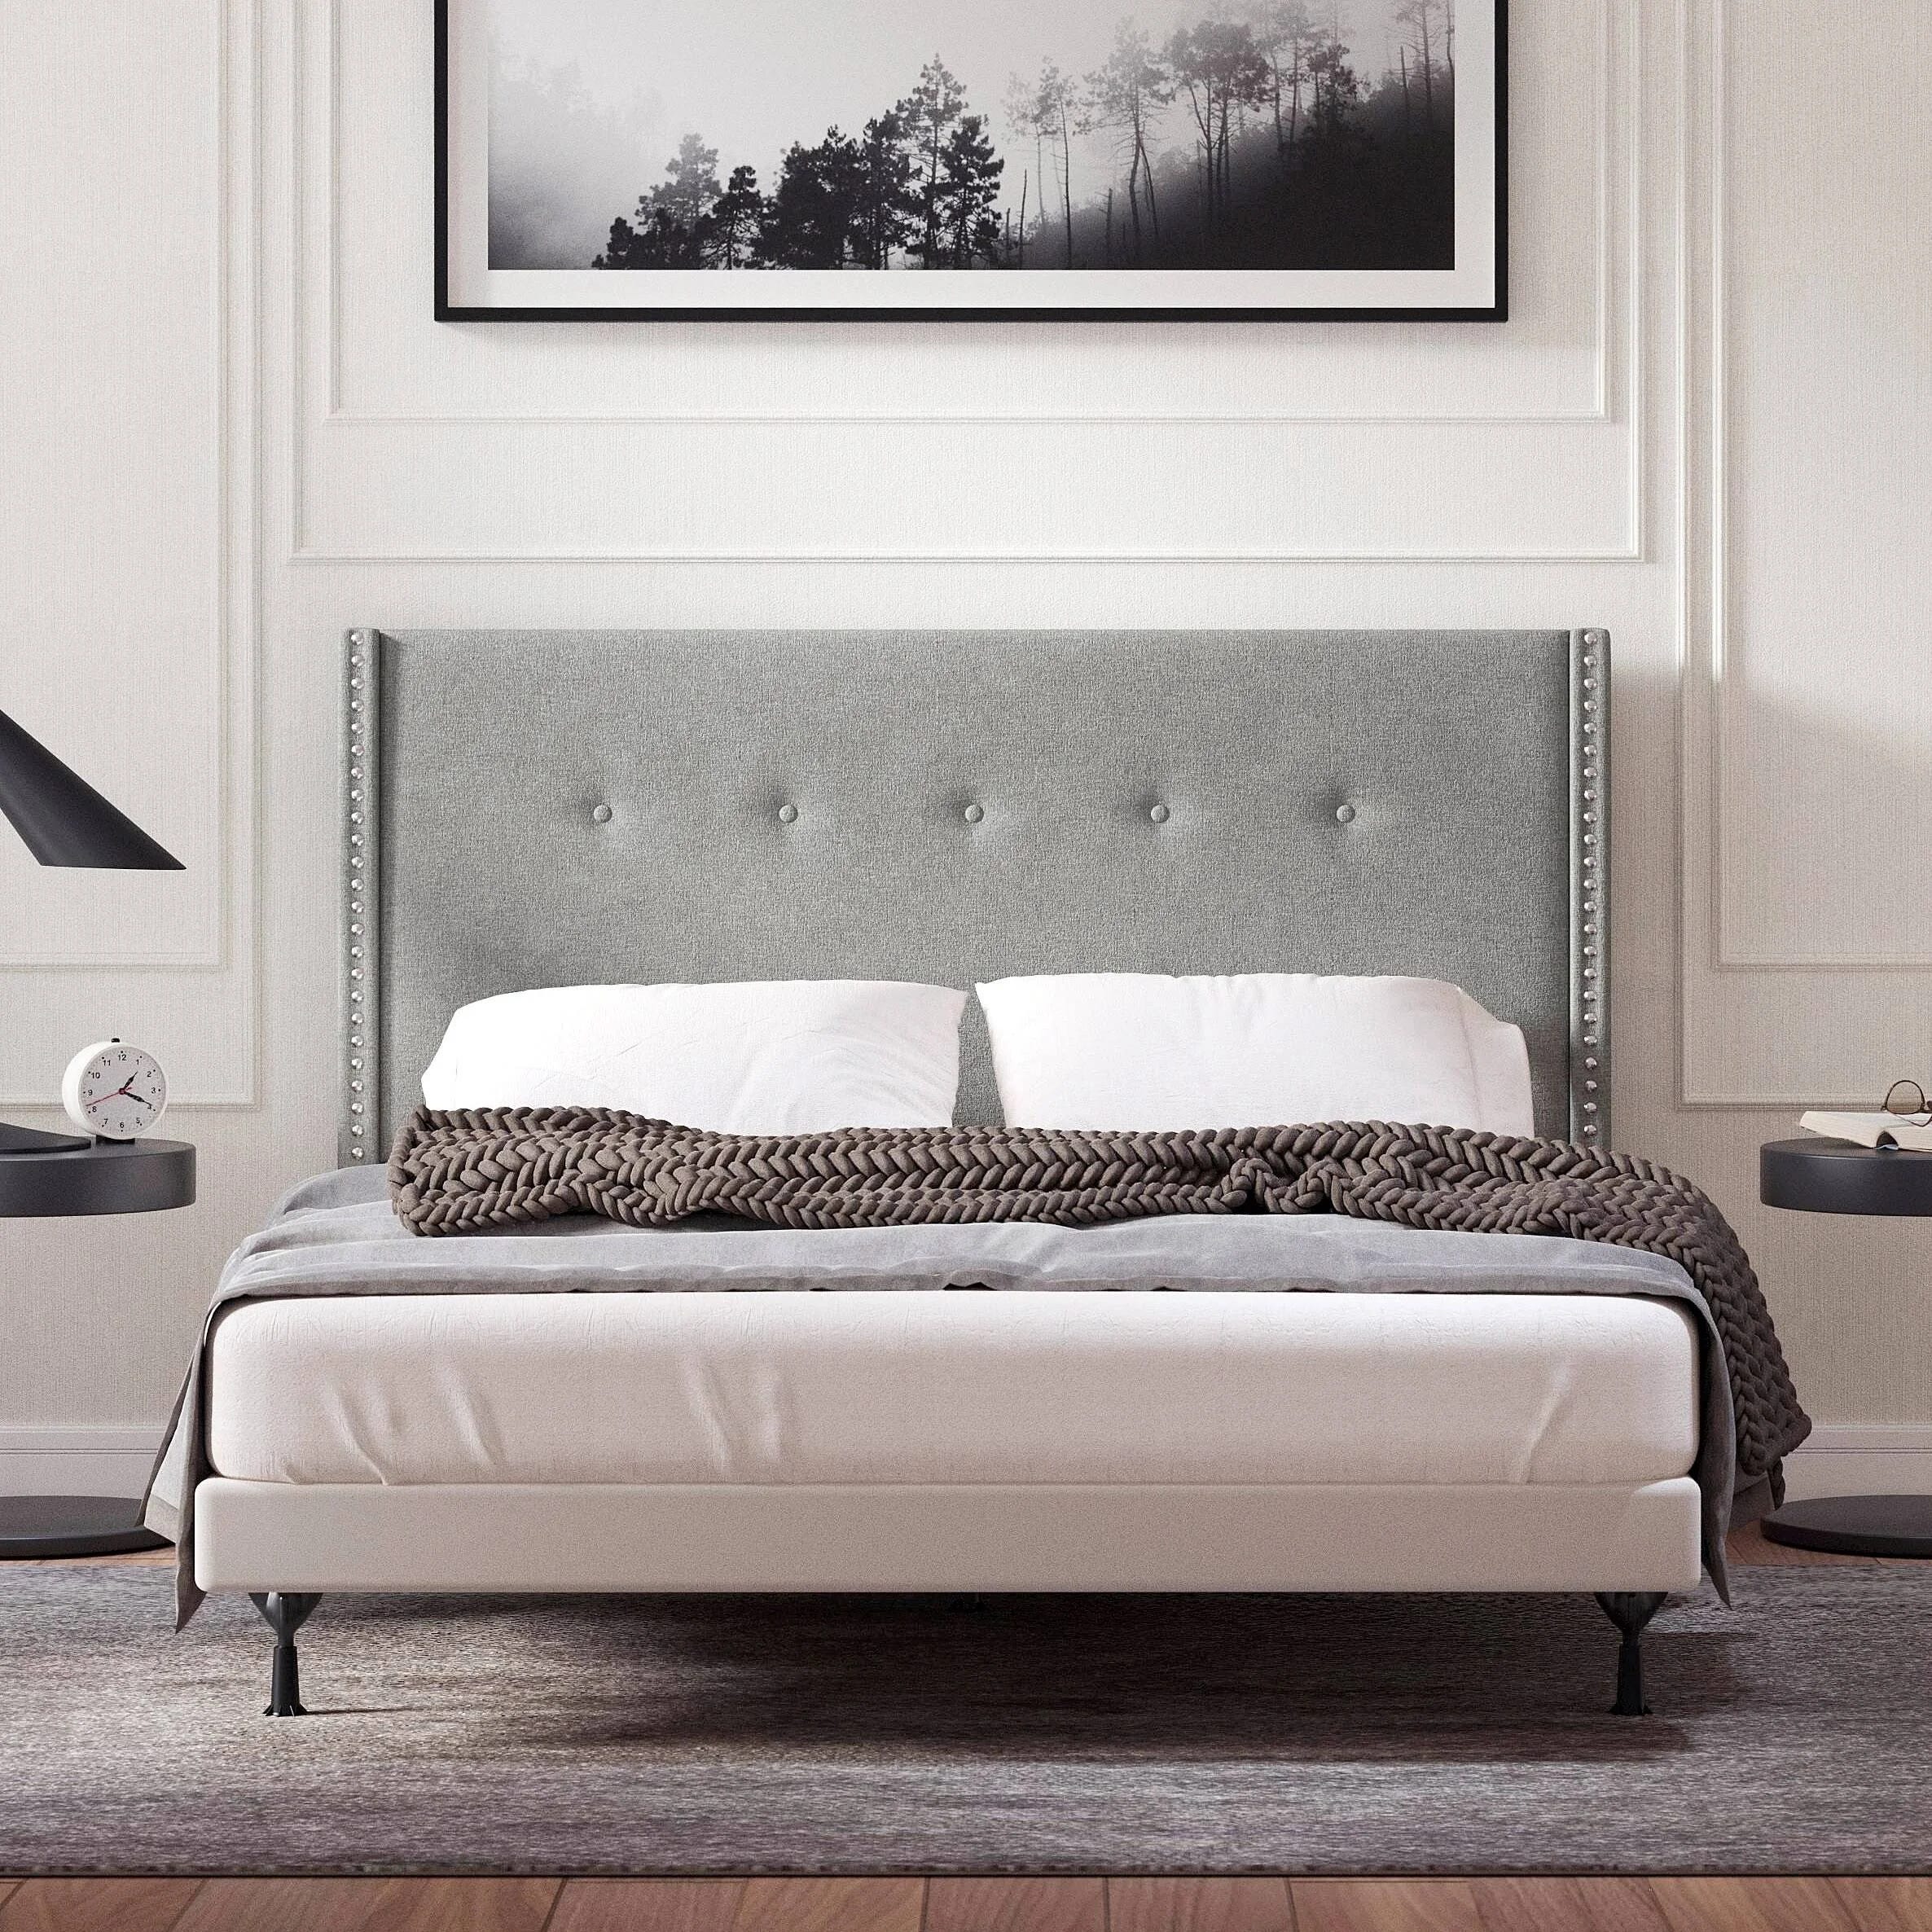 McM Upholstered Mid-Century Modern Headboard with Nail Head Wingback Design | Image